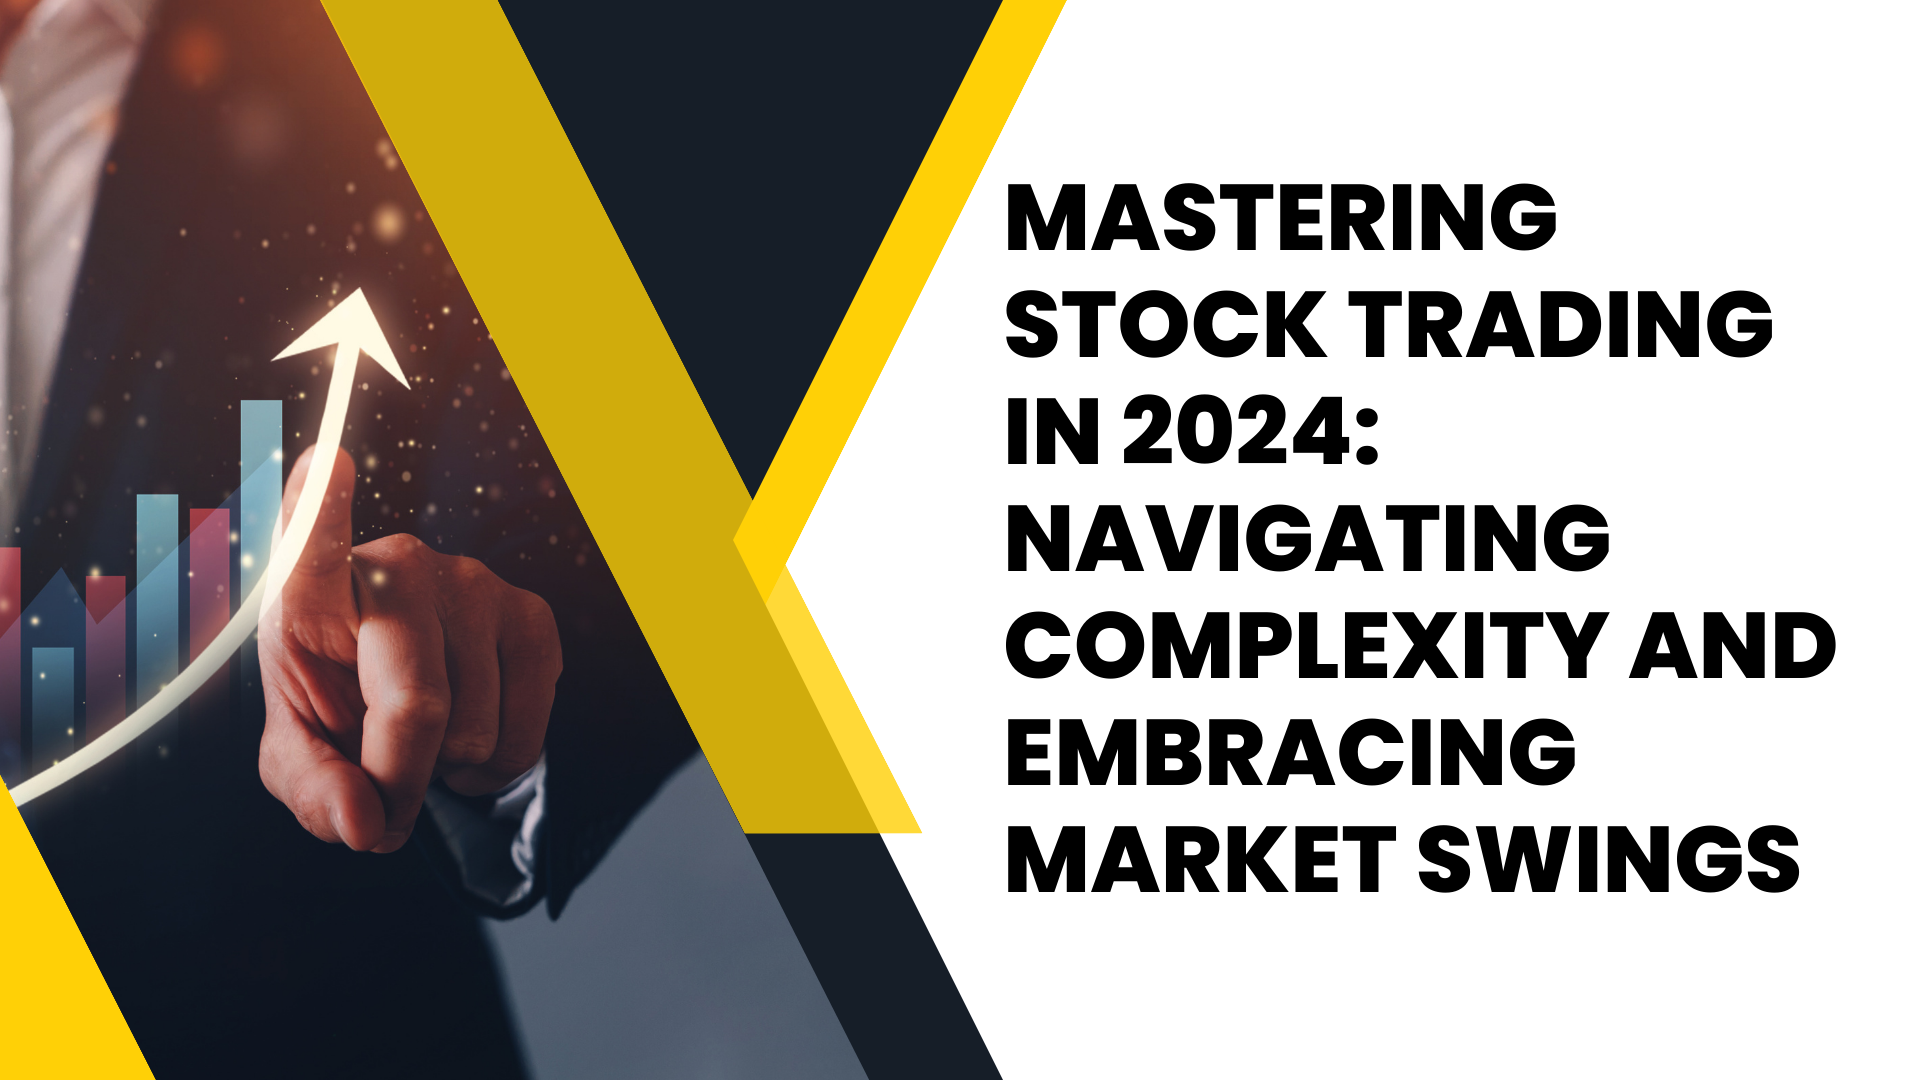 Mastering Stock Trading in 2024: Navigating Complexity and Embracing Market Swings